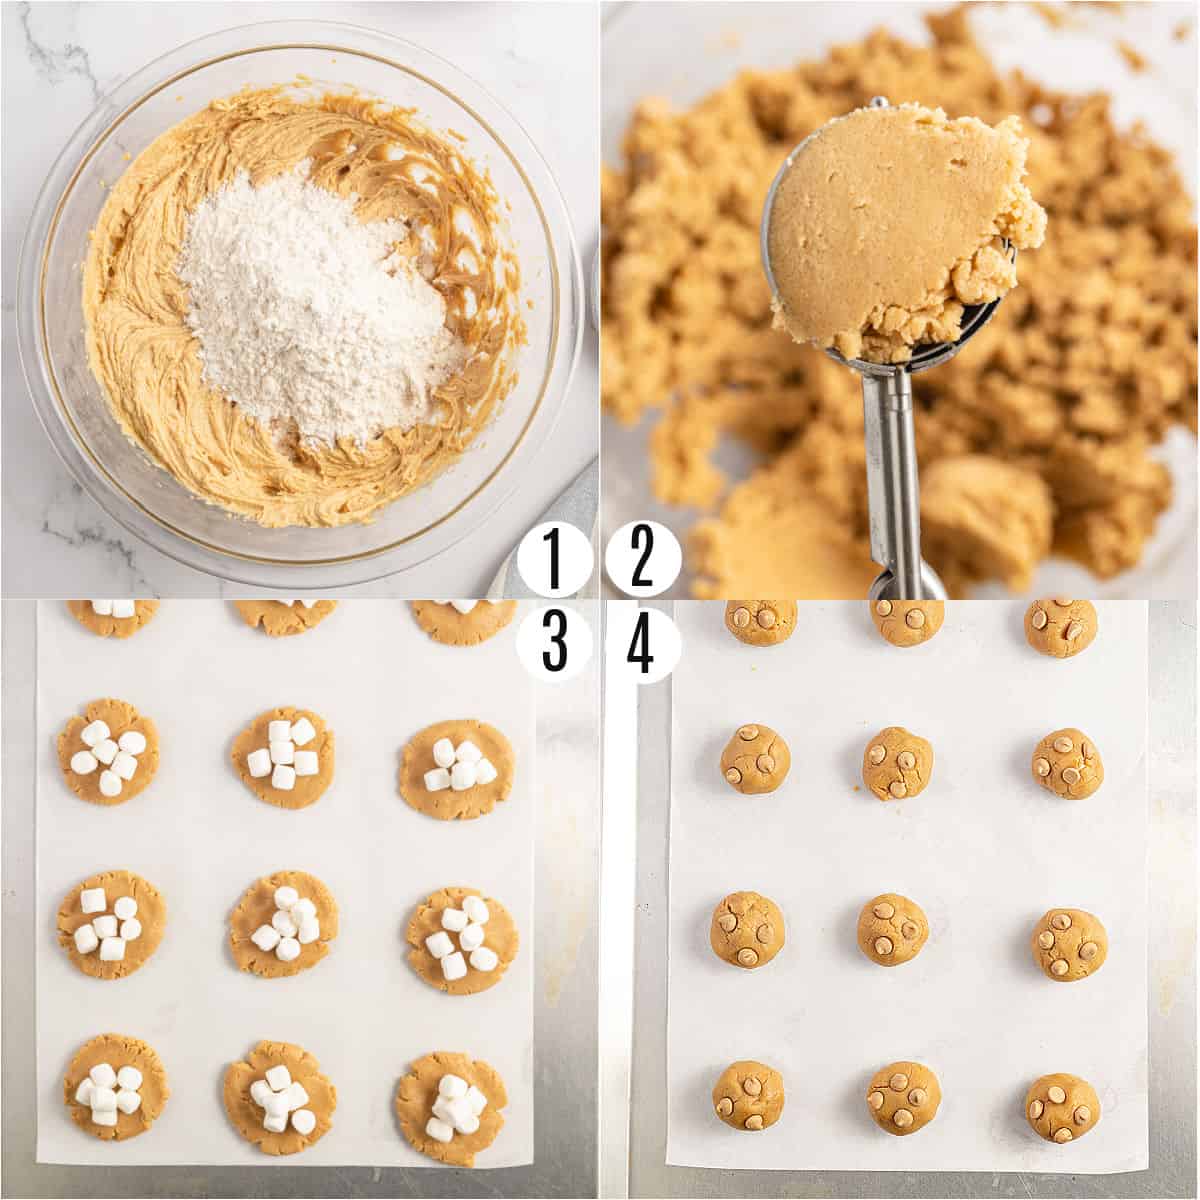 Step by step photos showing how to make fluffernutter cookies.